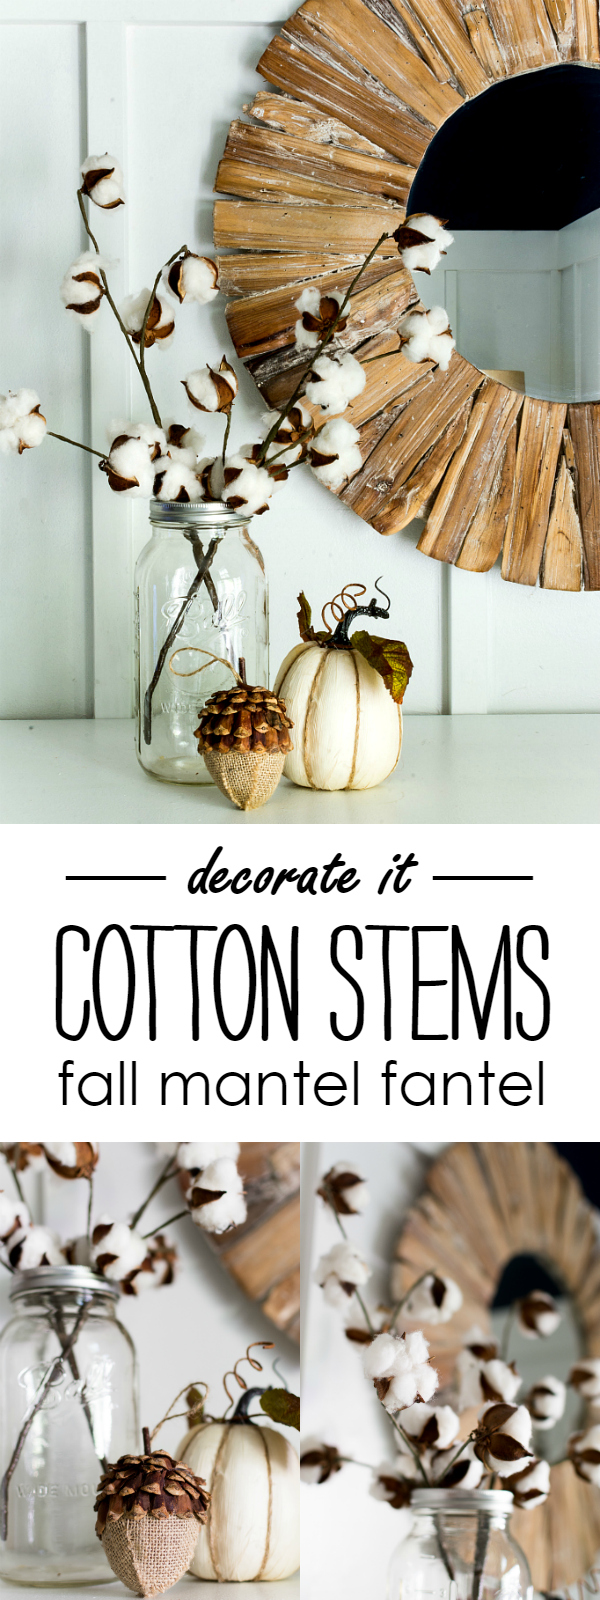 Simple Mantel with Cotton Stems - Fall Mantel Fantel Decorating Ideas with Cotton Stems and Driftwood Miror